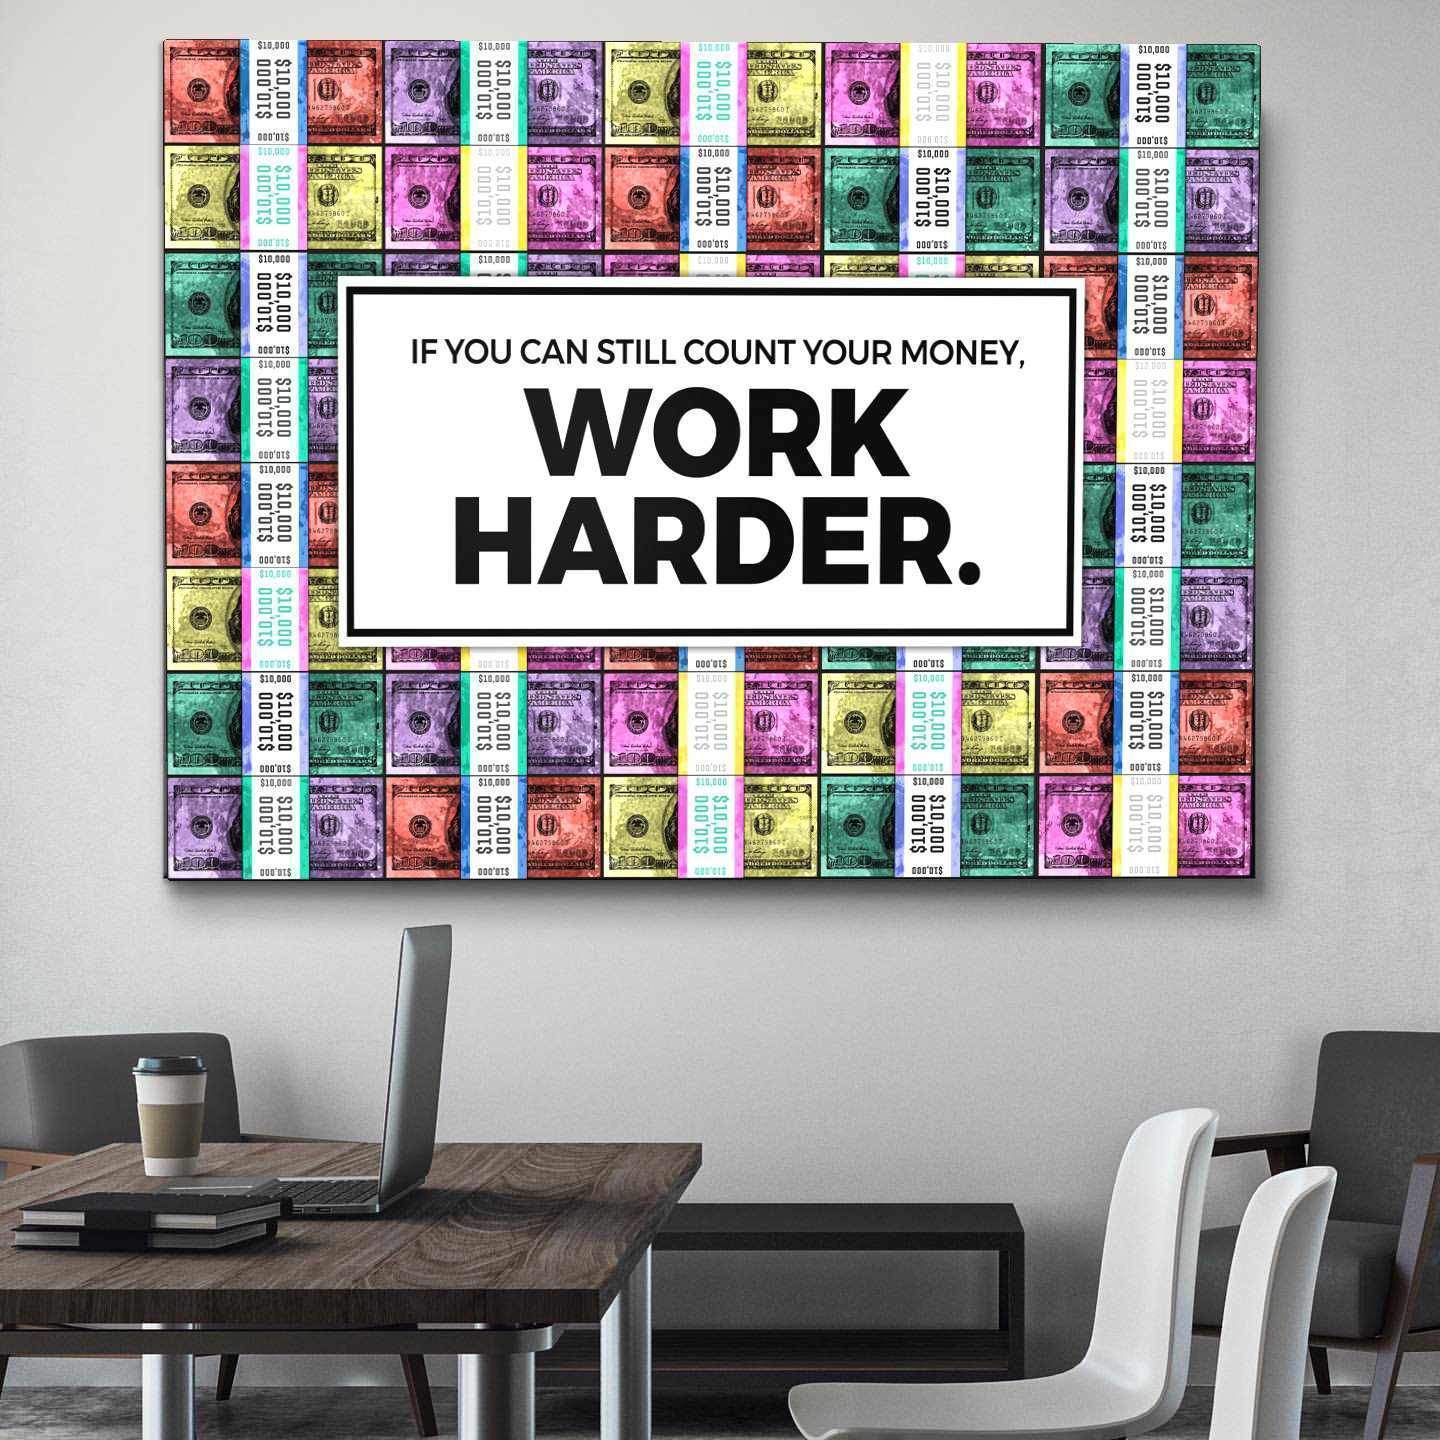 Work Harder Office Wall Art Motivational Poster Canvas Print-WORK HARDER - PASTEL EDITION-DEVICI